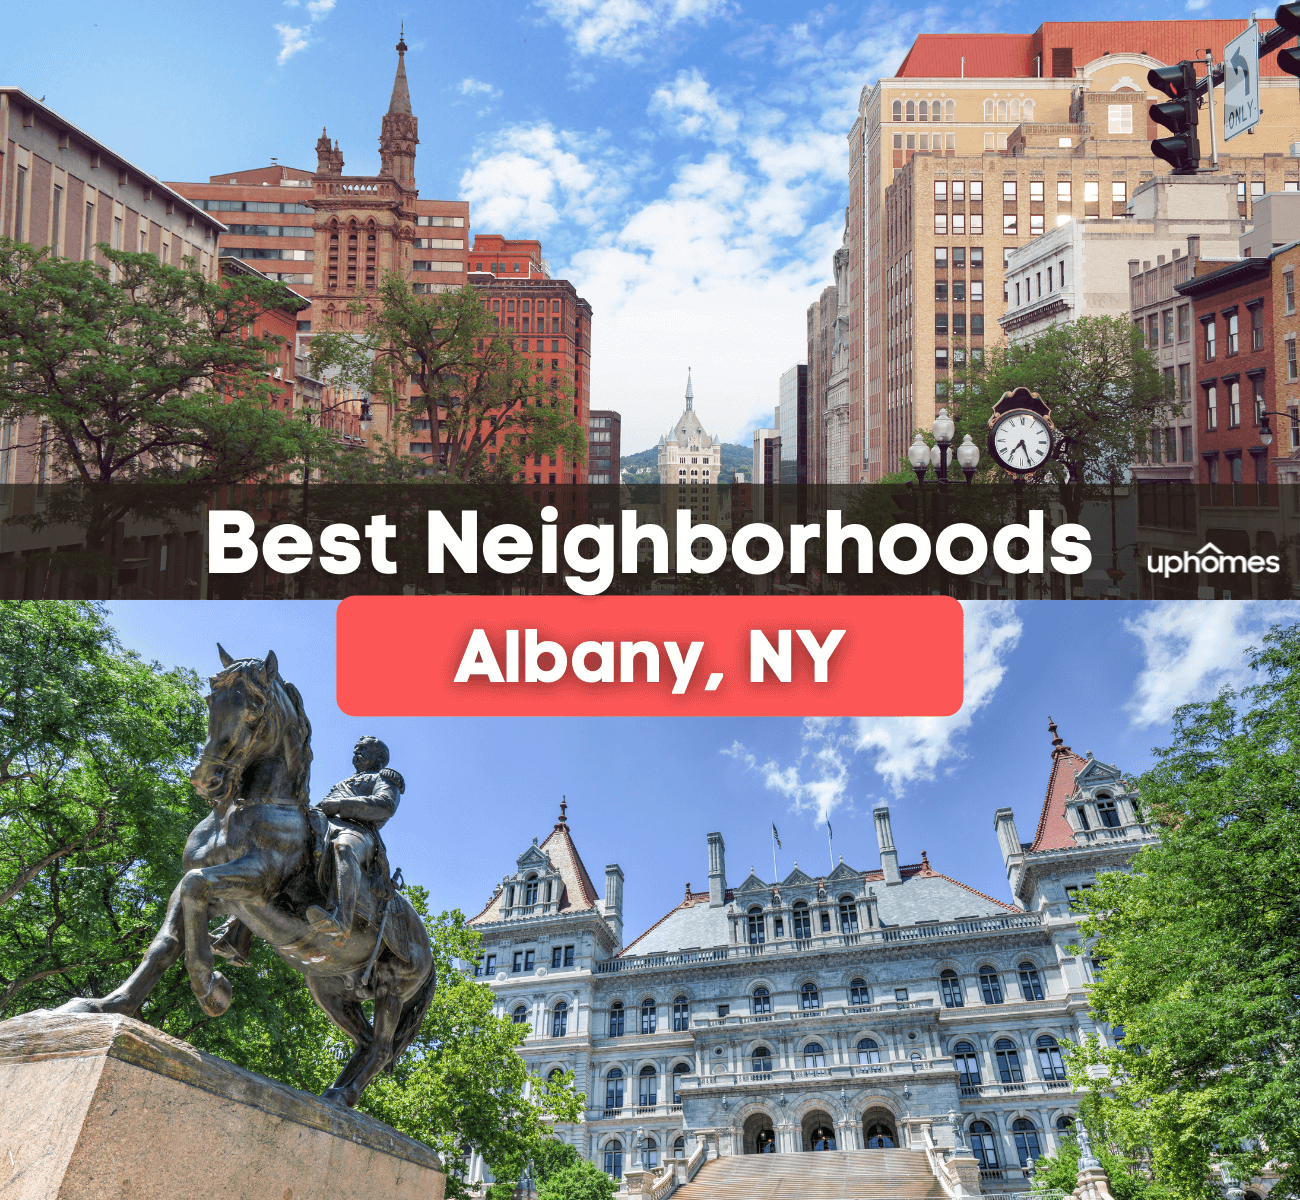 Best Neighborhoods in Albany, NY - Where are the best places to live in Albany, New York?